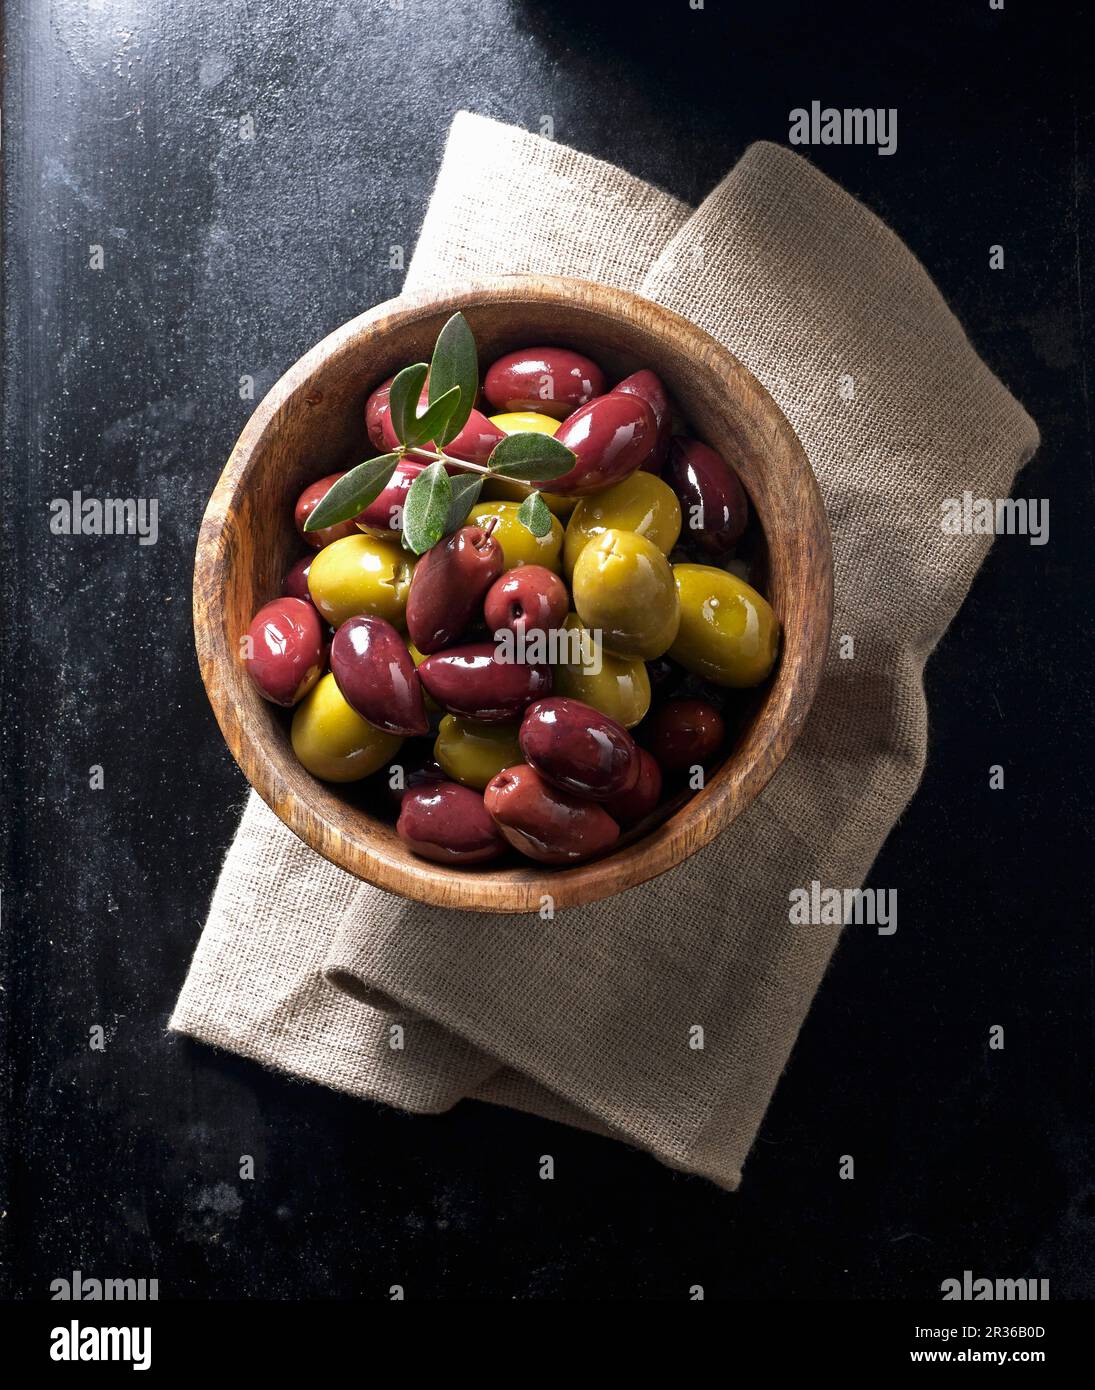 Kalamata olives and green olives in a wooden bowl on a linen napkin Stock Photo